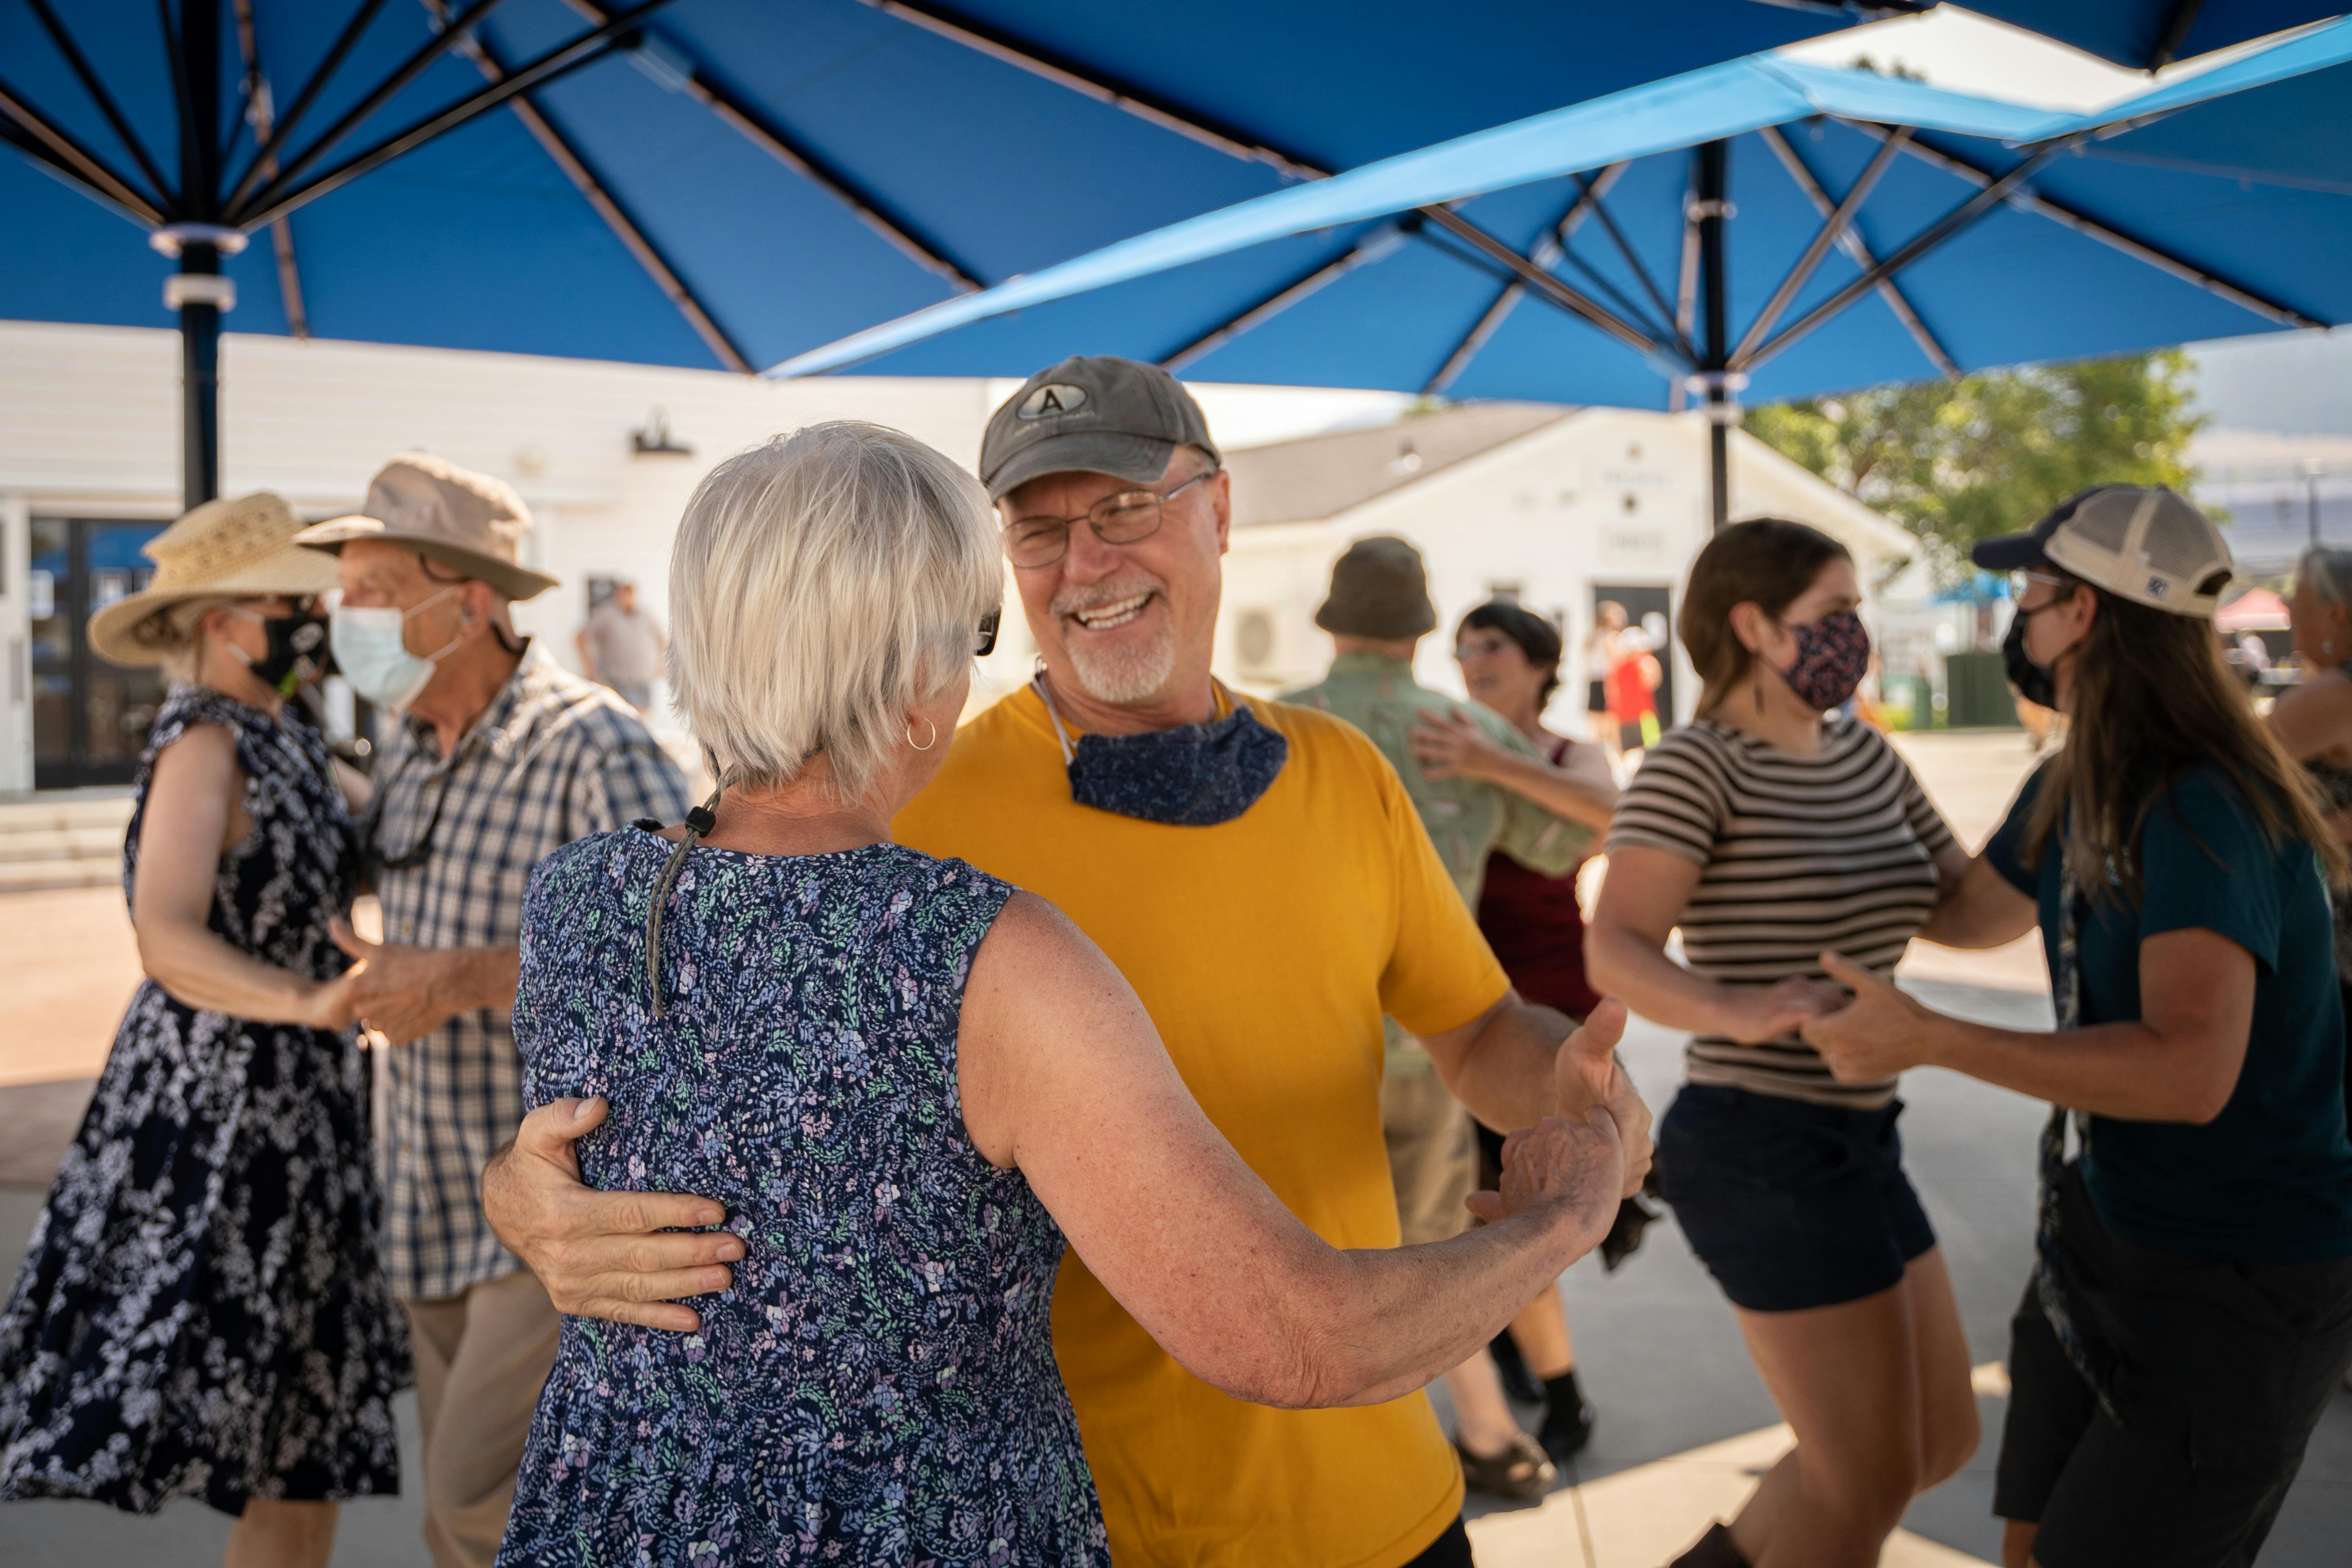 Couples dance on a sunny day at the fair.